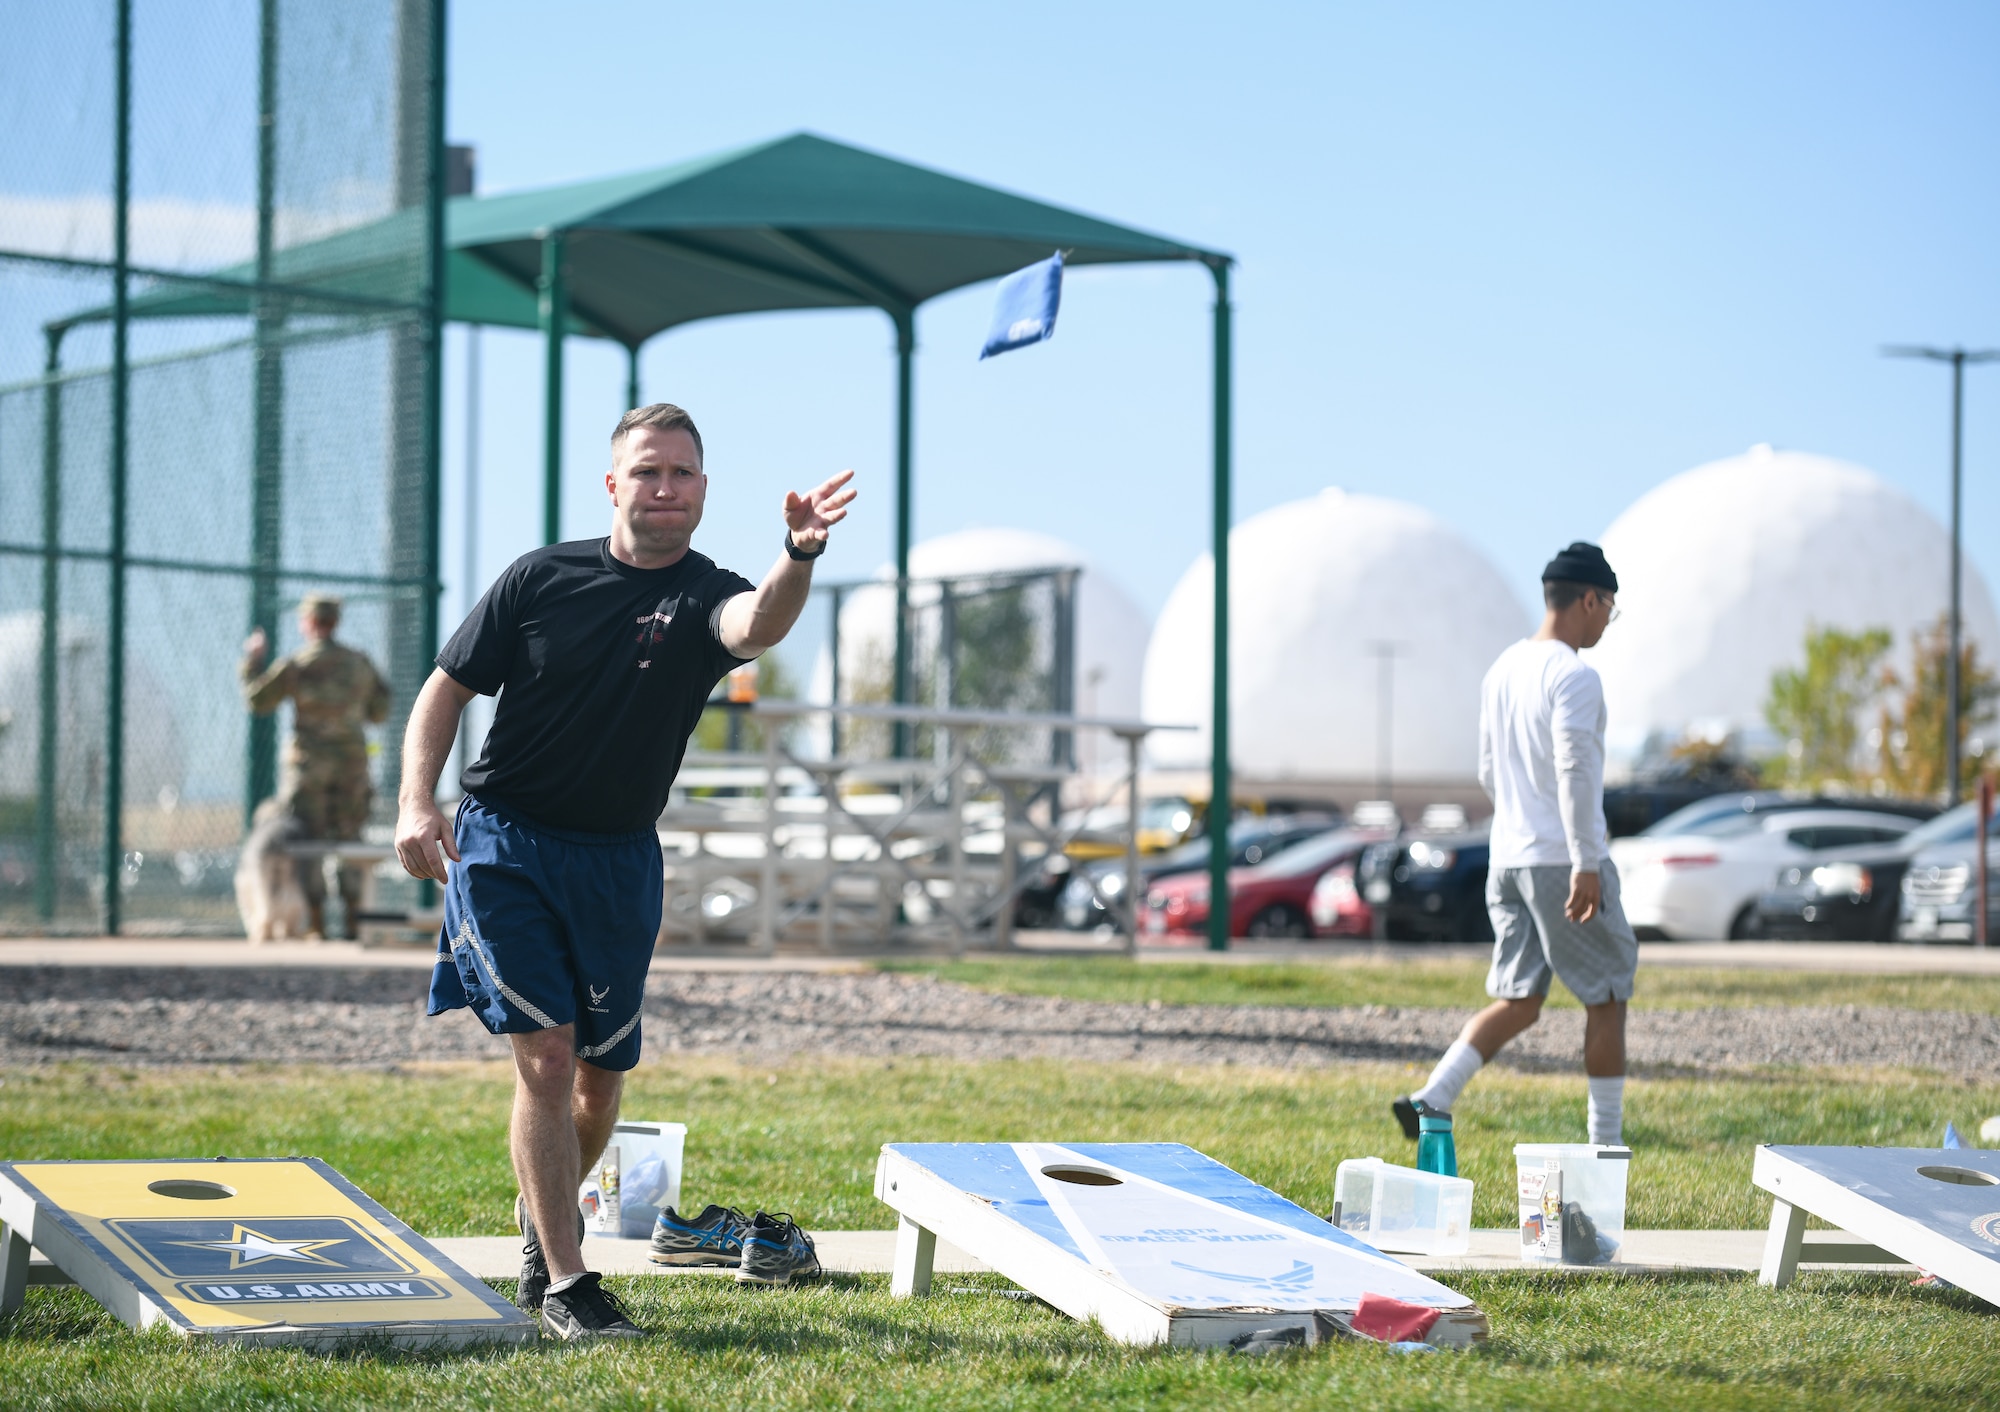 Senior Master Sgt. Michael Grosebeck, the 460th Wing Staff Agency superintendent, throws a bean bag during a game of cornhole at the softball fields on Buckley Air Force Base, Colo.